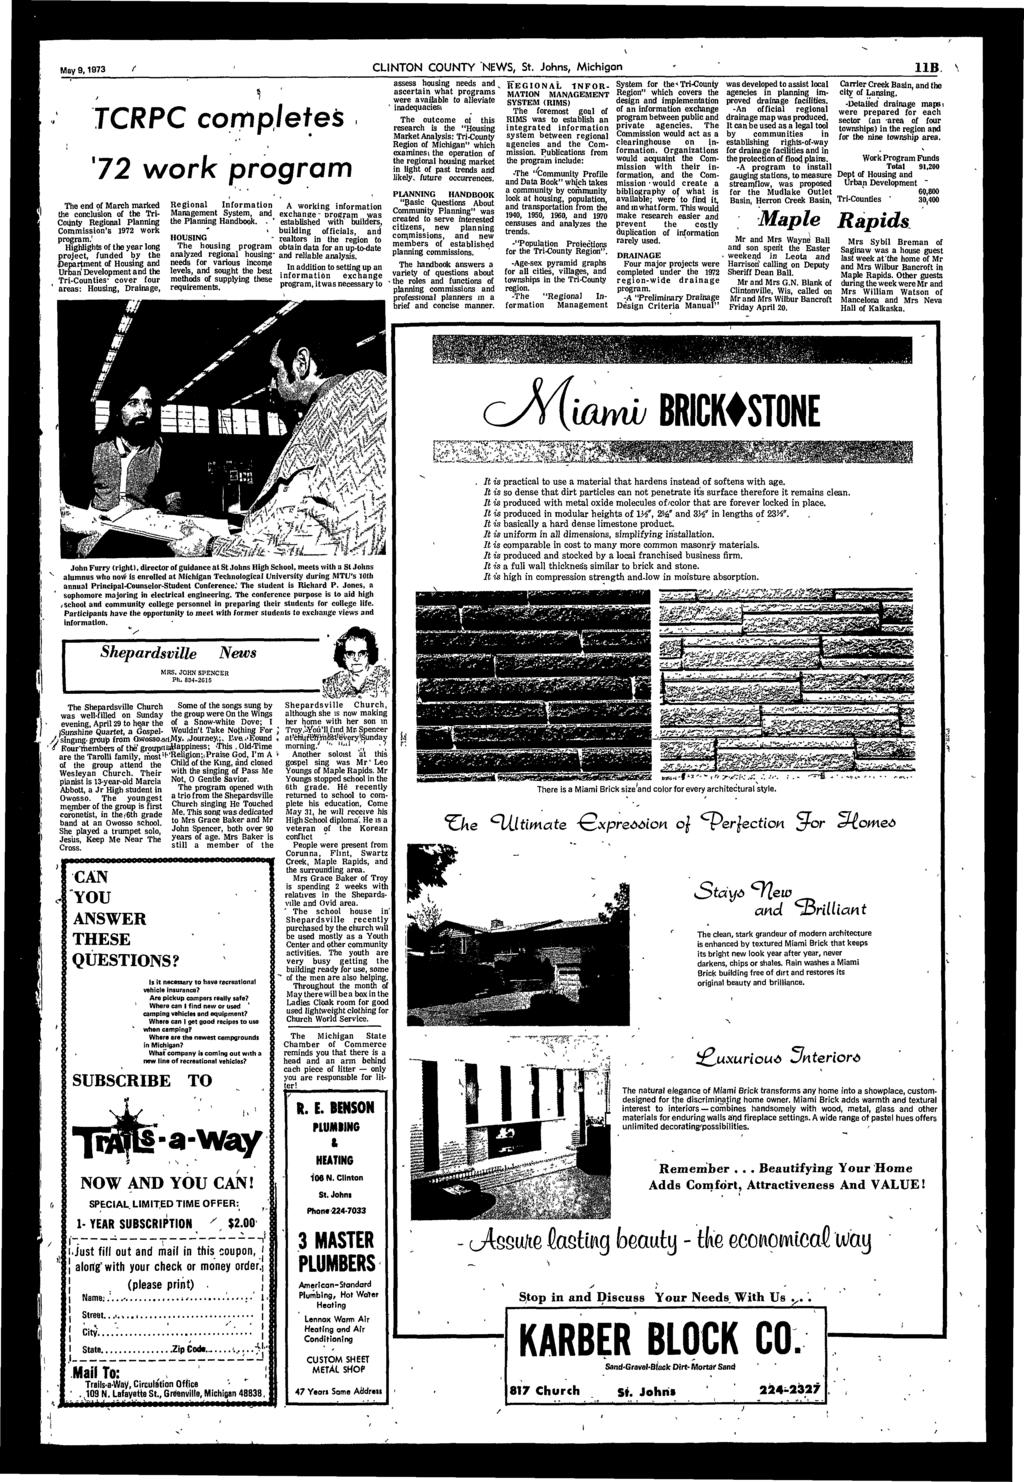 May 9,1973 CLNTON COUNTY NEWS, St. Johns, Mchgan 11B \ TCRPC completes 72 work program The end of March marked the concluson of the Tr- Conty Regonal Plannng Commssons 1972 work program.